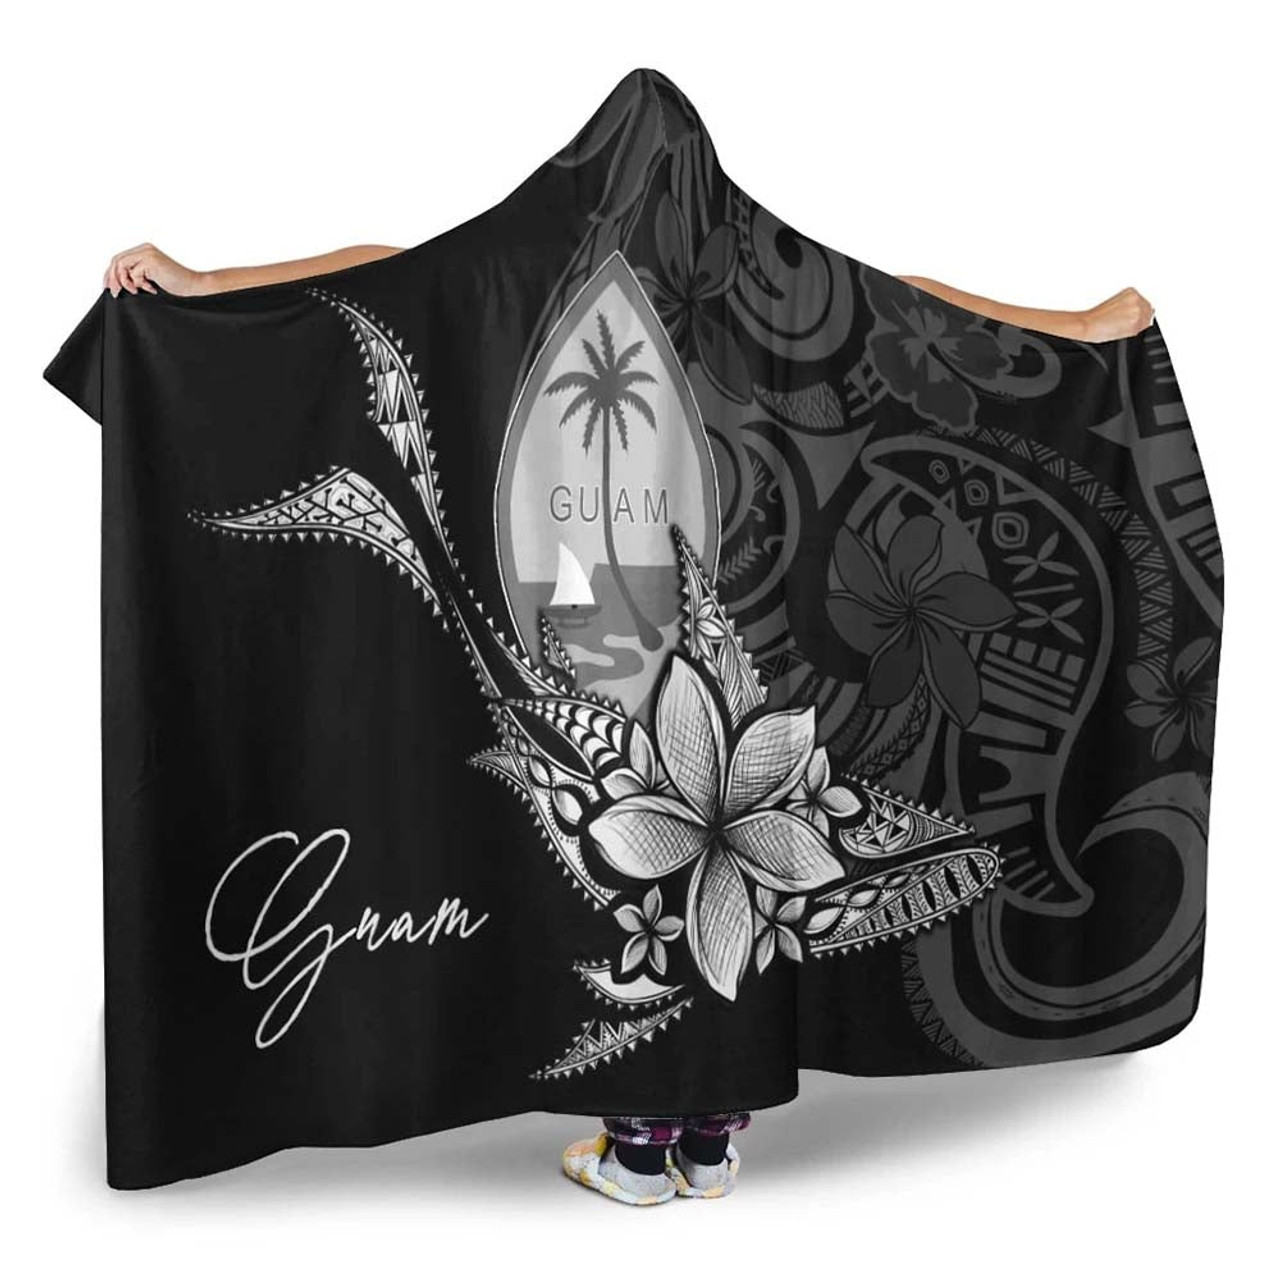 Guam Hooded Blanket - Fish With Plumeria Flowers Style 2